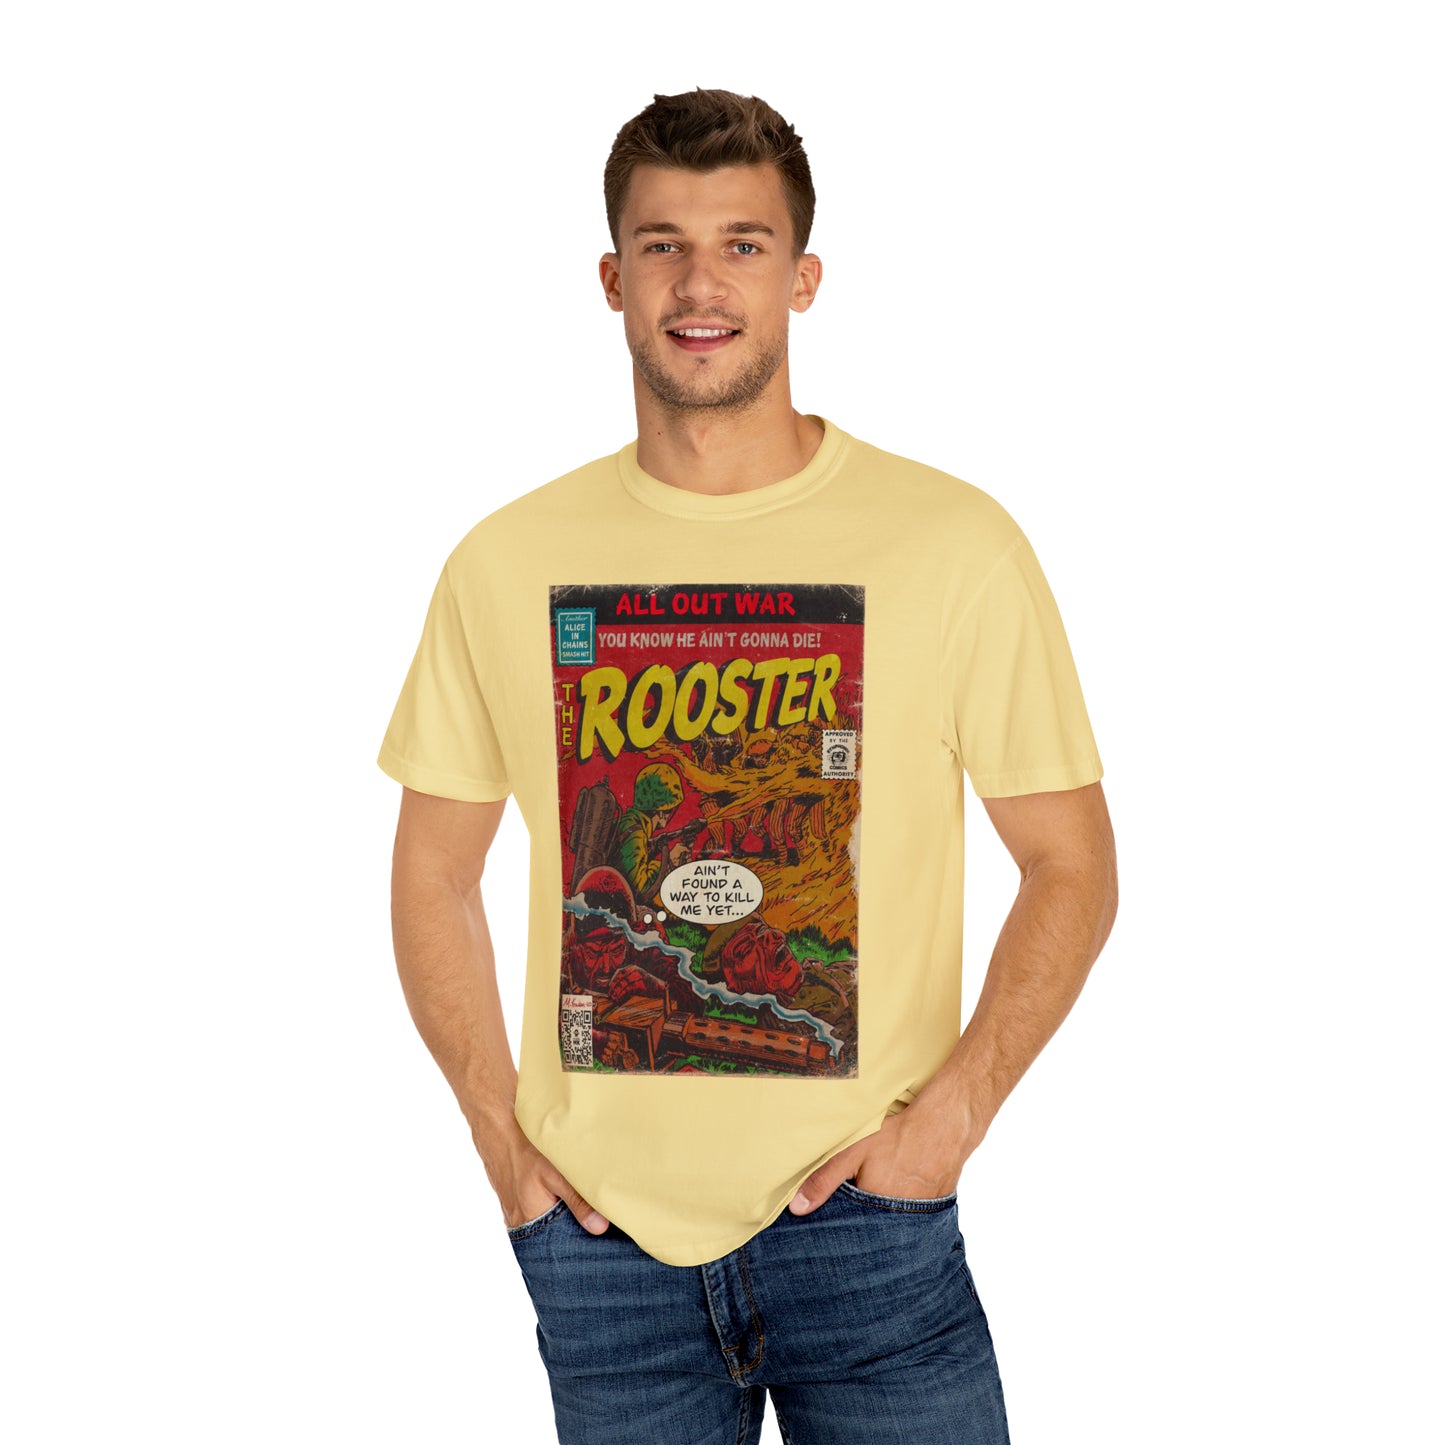 Alice In Chains - Rooster - Unisex Comfort Colors T-shirt